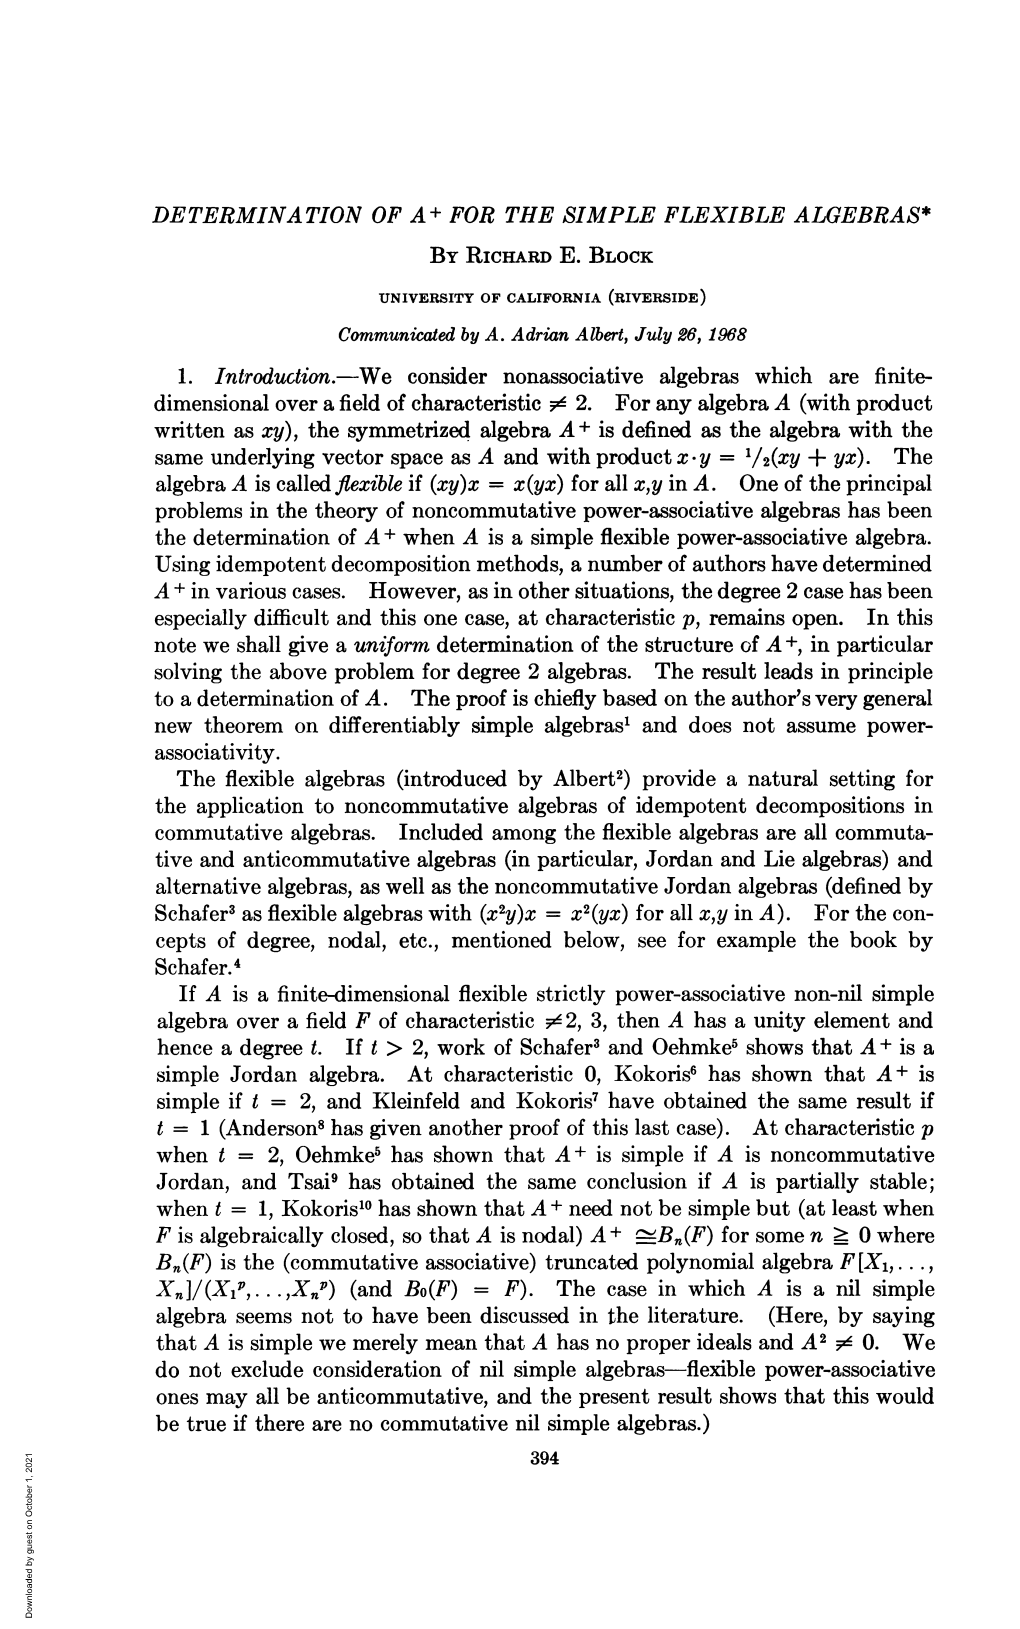 Do Not Exclude Consideration of Nil Simple Algebras-Flexible Power-Associative